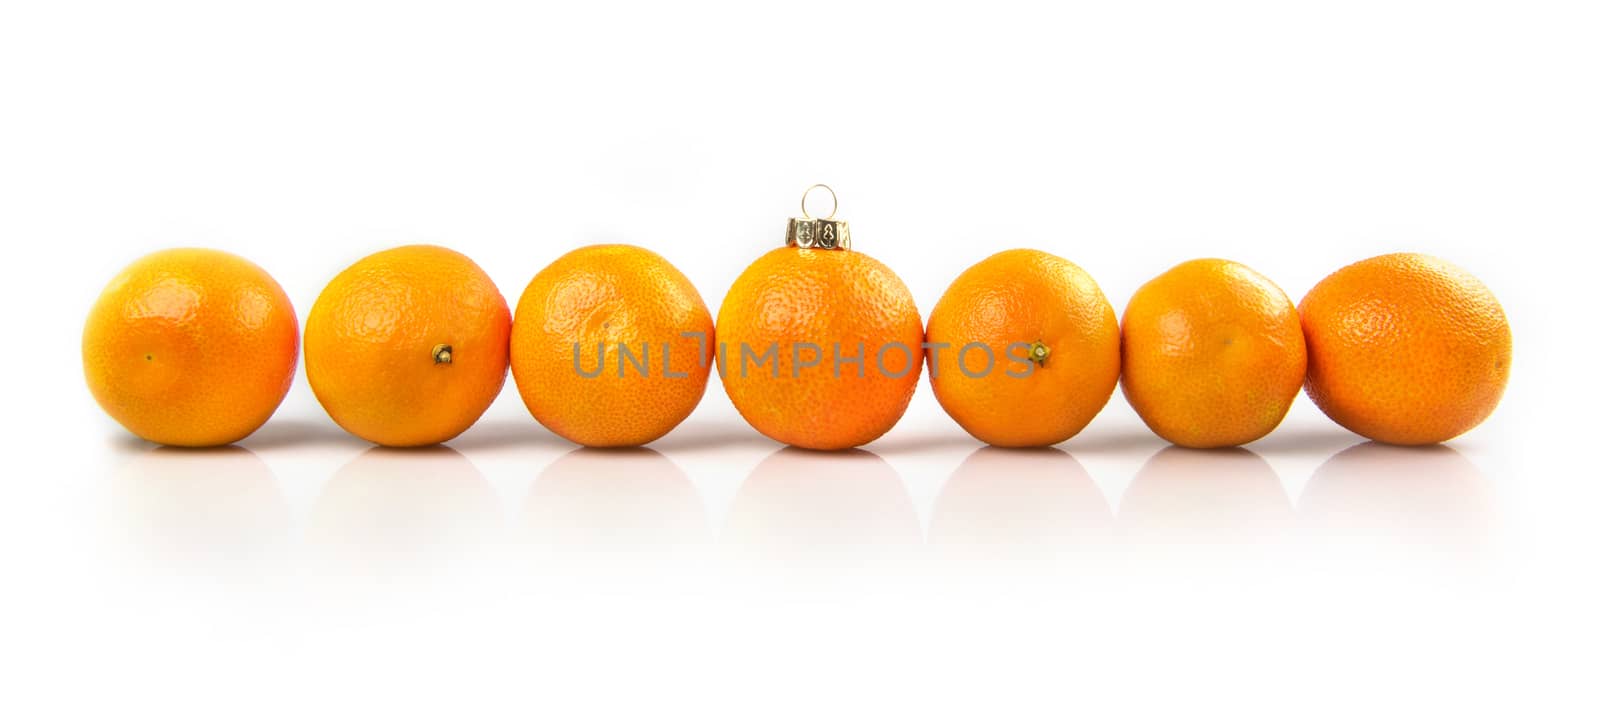 Tangerines as a xmas ball on Christmas and New Year. Russian tradition fir tree toy fruits holiday concept decoration design on holiday. Tangerines Row Line Isolated on white background.